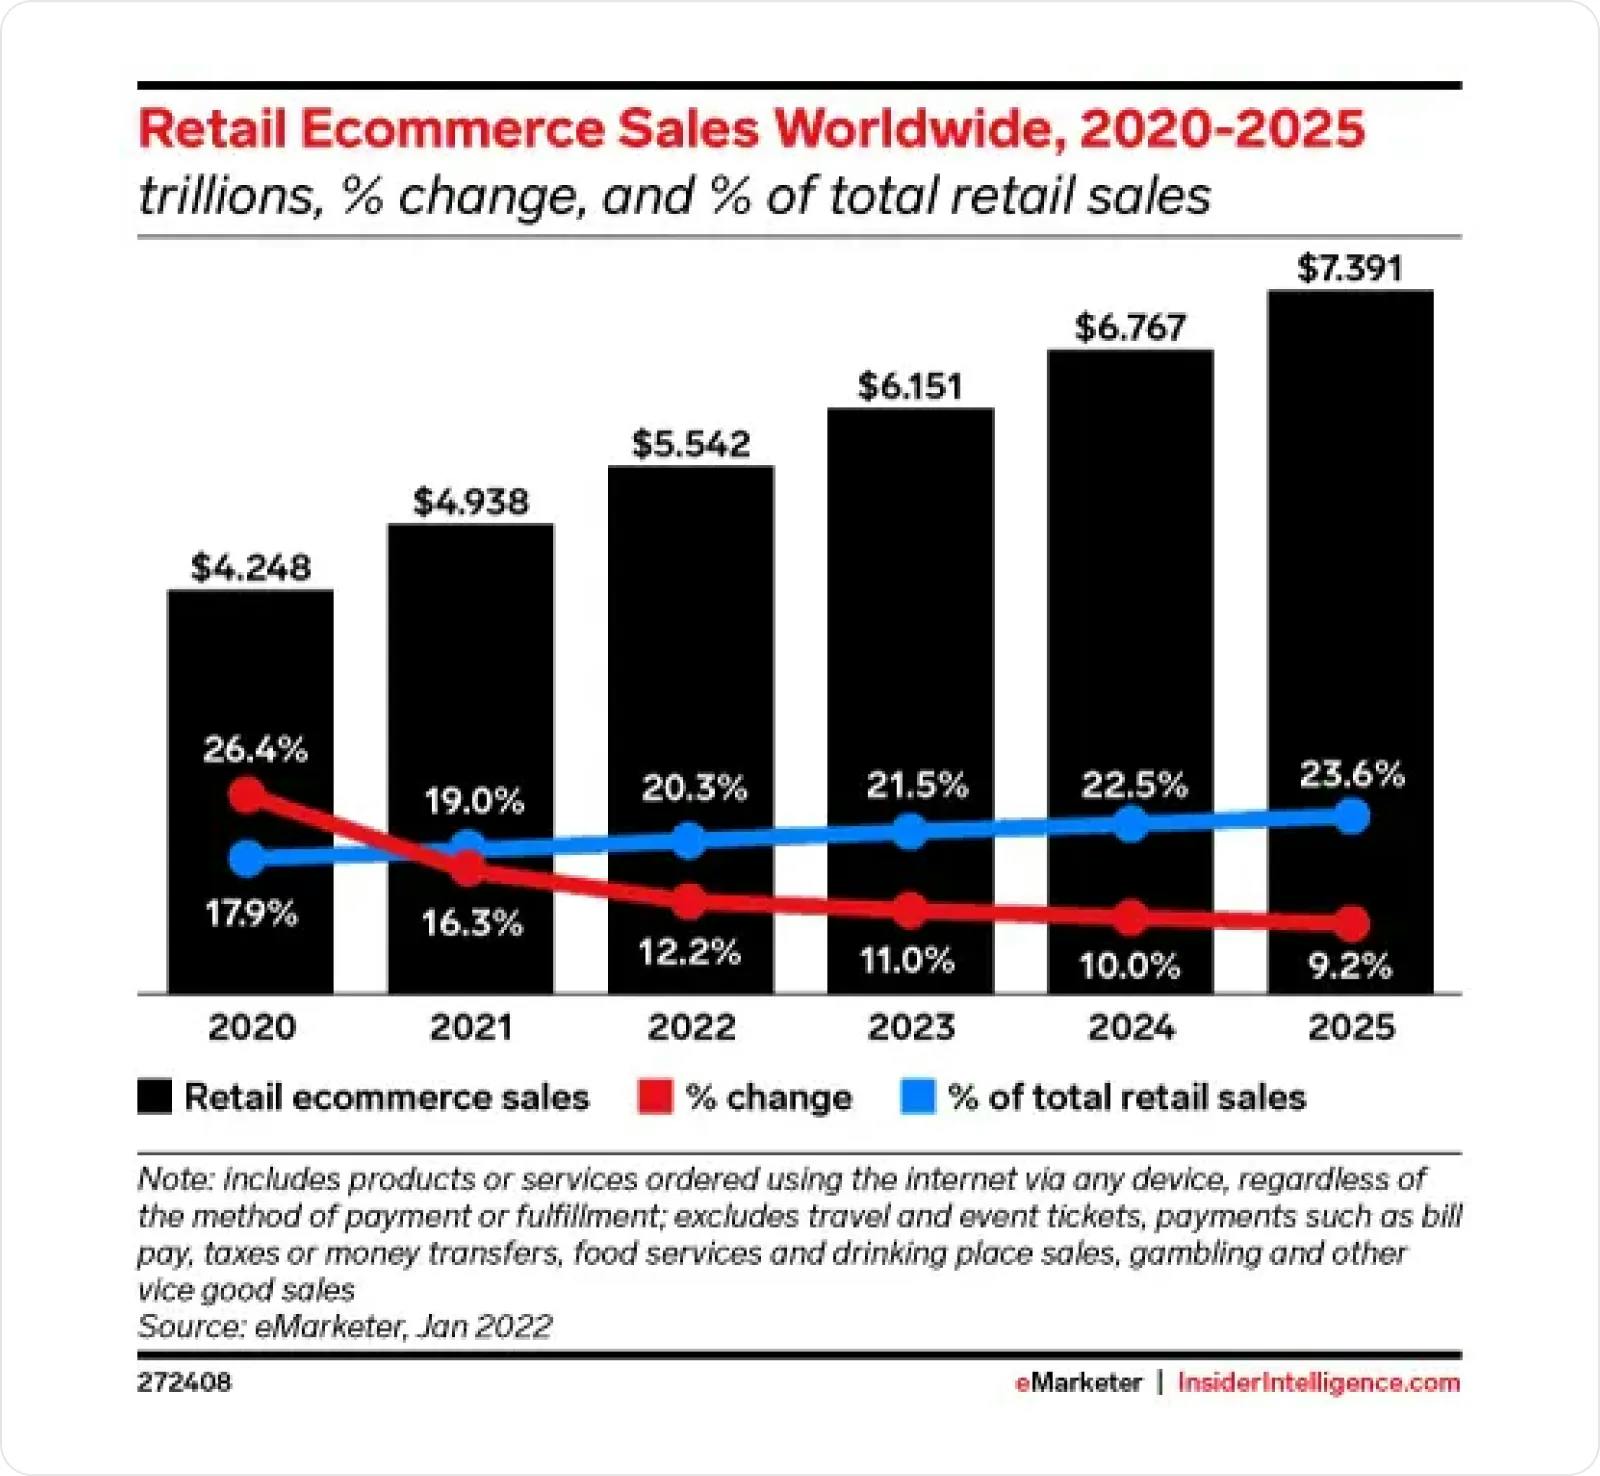 Retail ecommerce sales worldwide graph